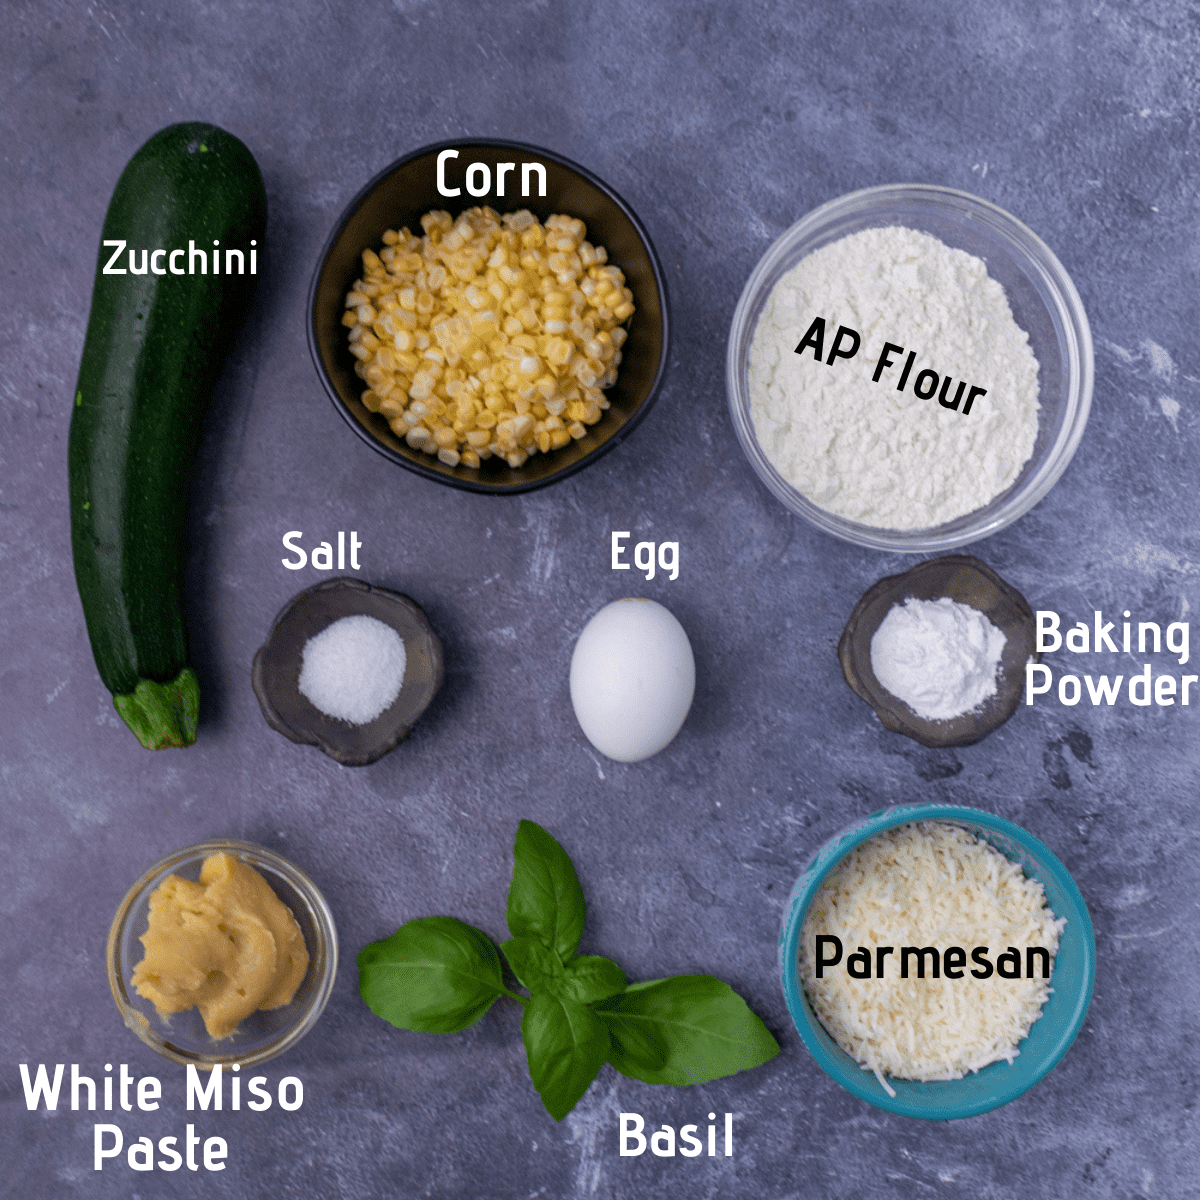 Raw ingredients laid out and labeled, zucchini, corn, AP flour, kosher salt, egg, baking powder, white miso, basil and parmesan